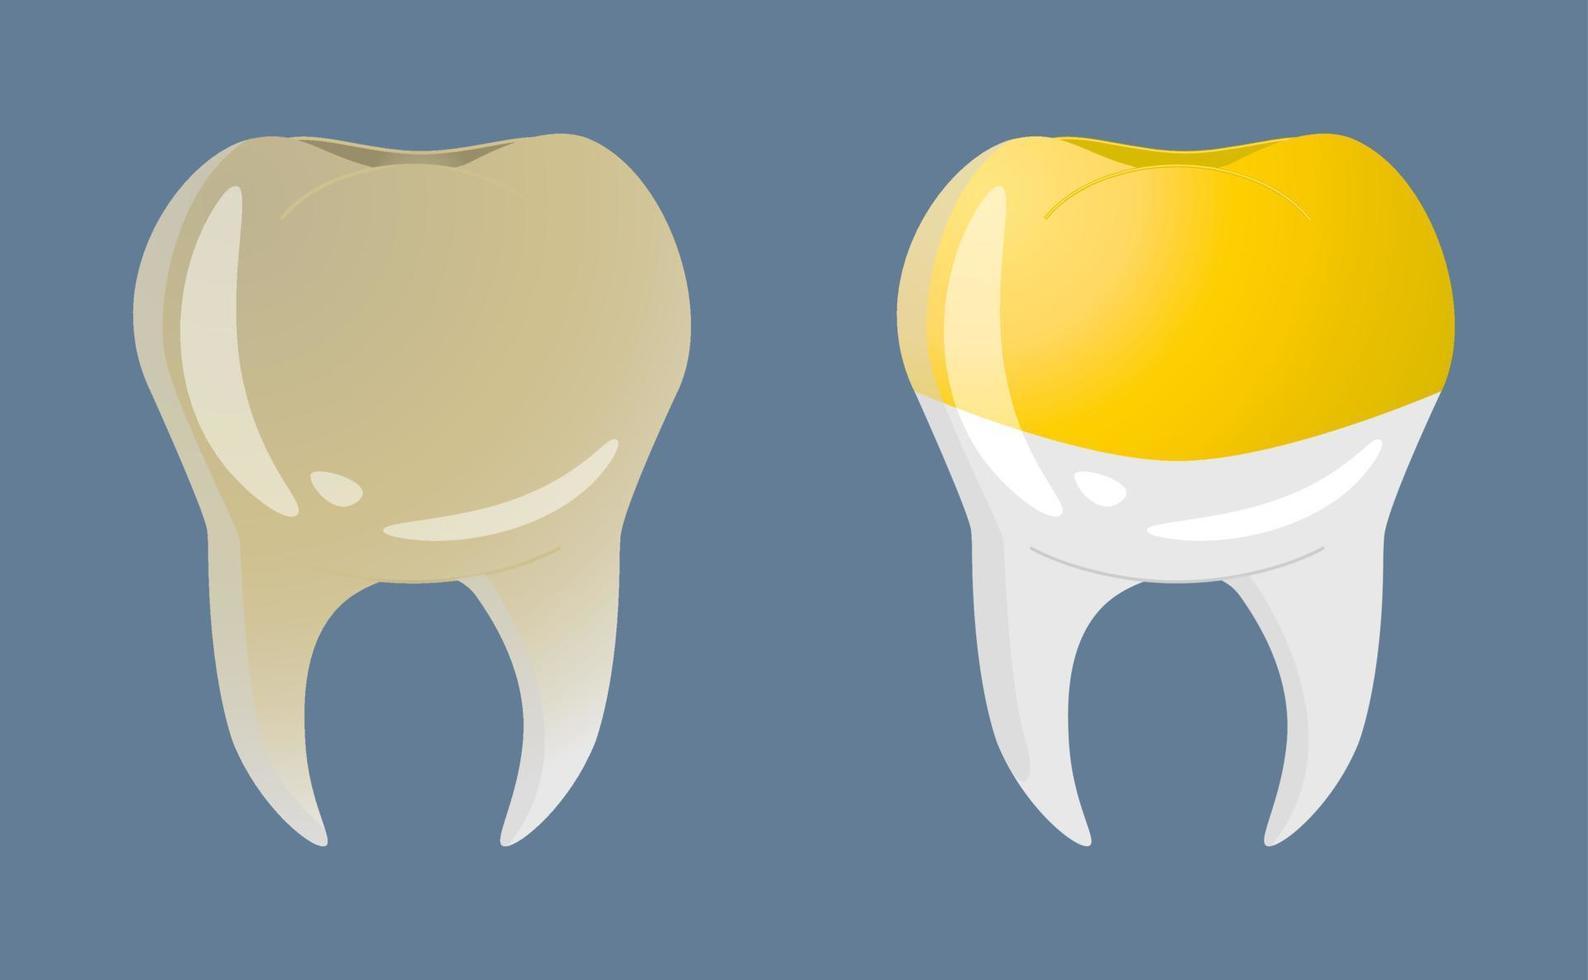 Teeth in realistic style. Yellow teeth icons. Colorful vector illustration isolated on background.